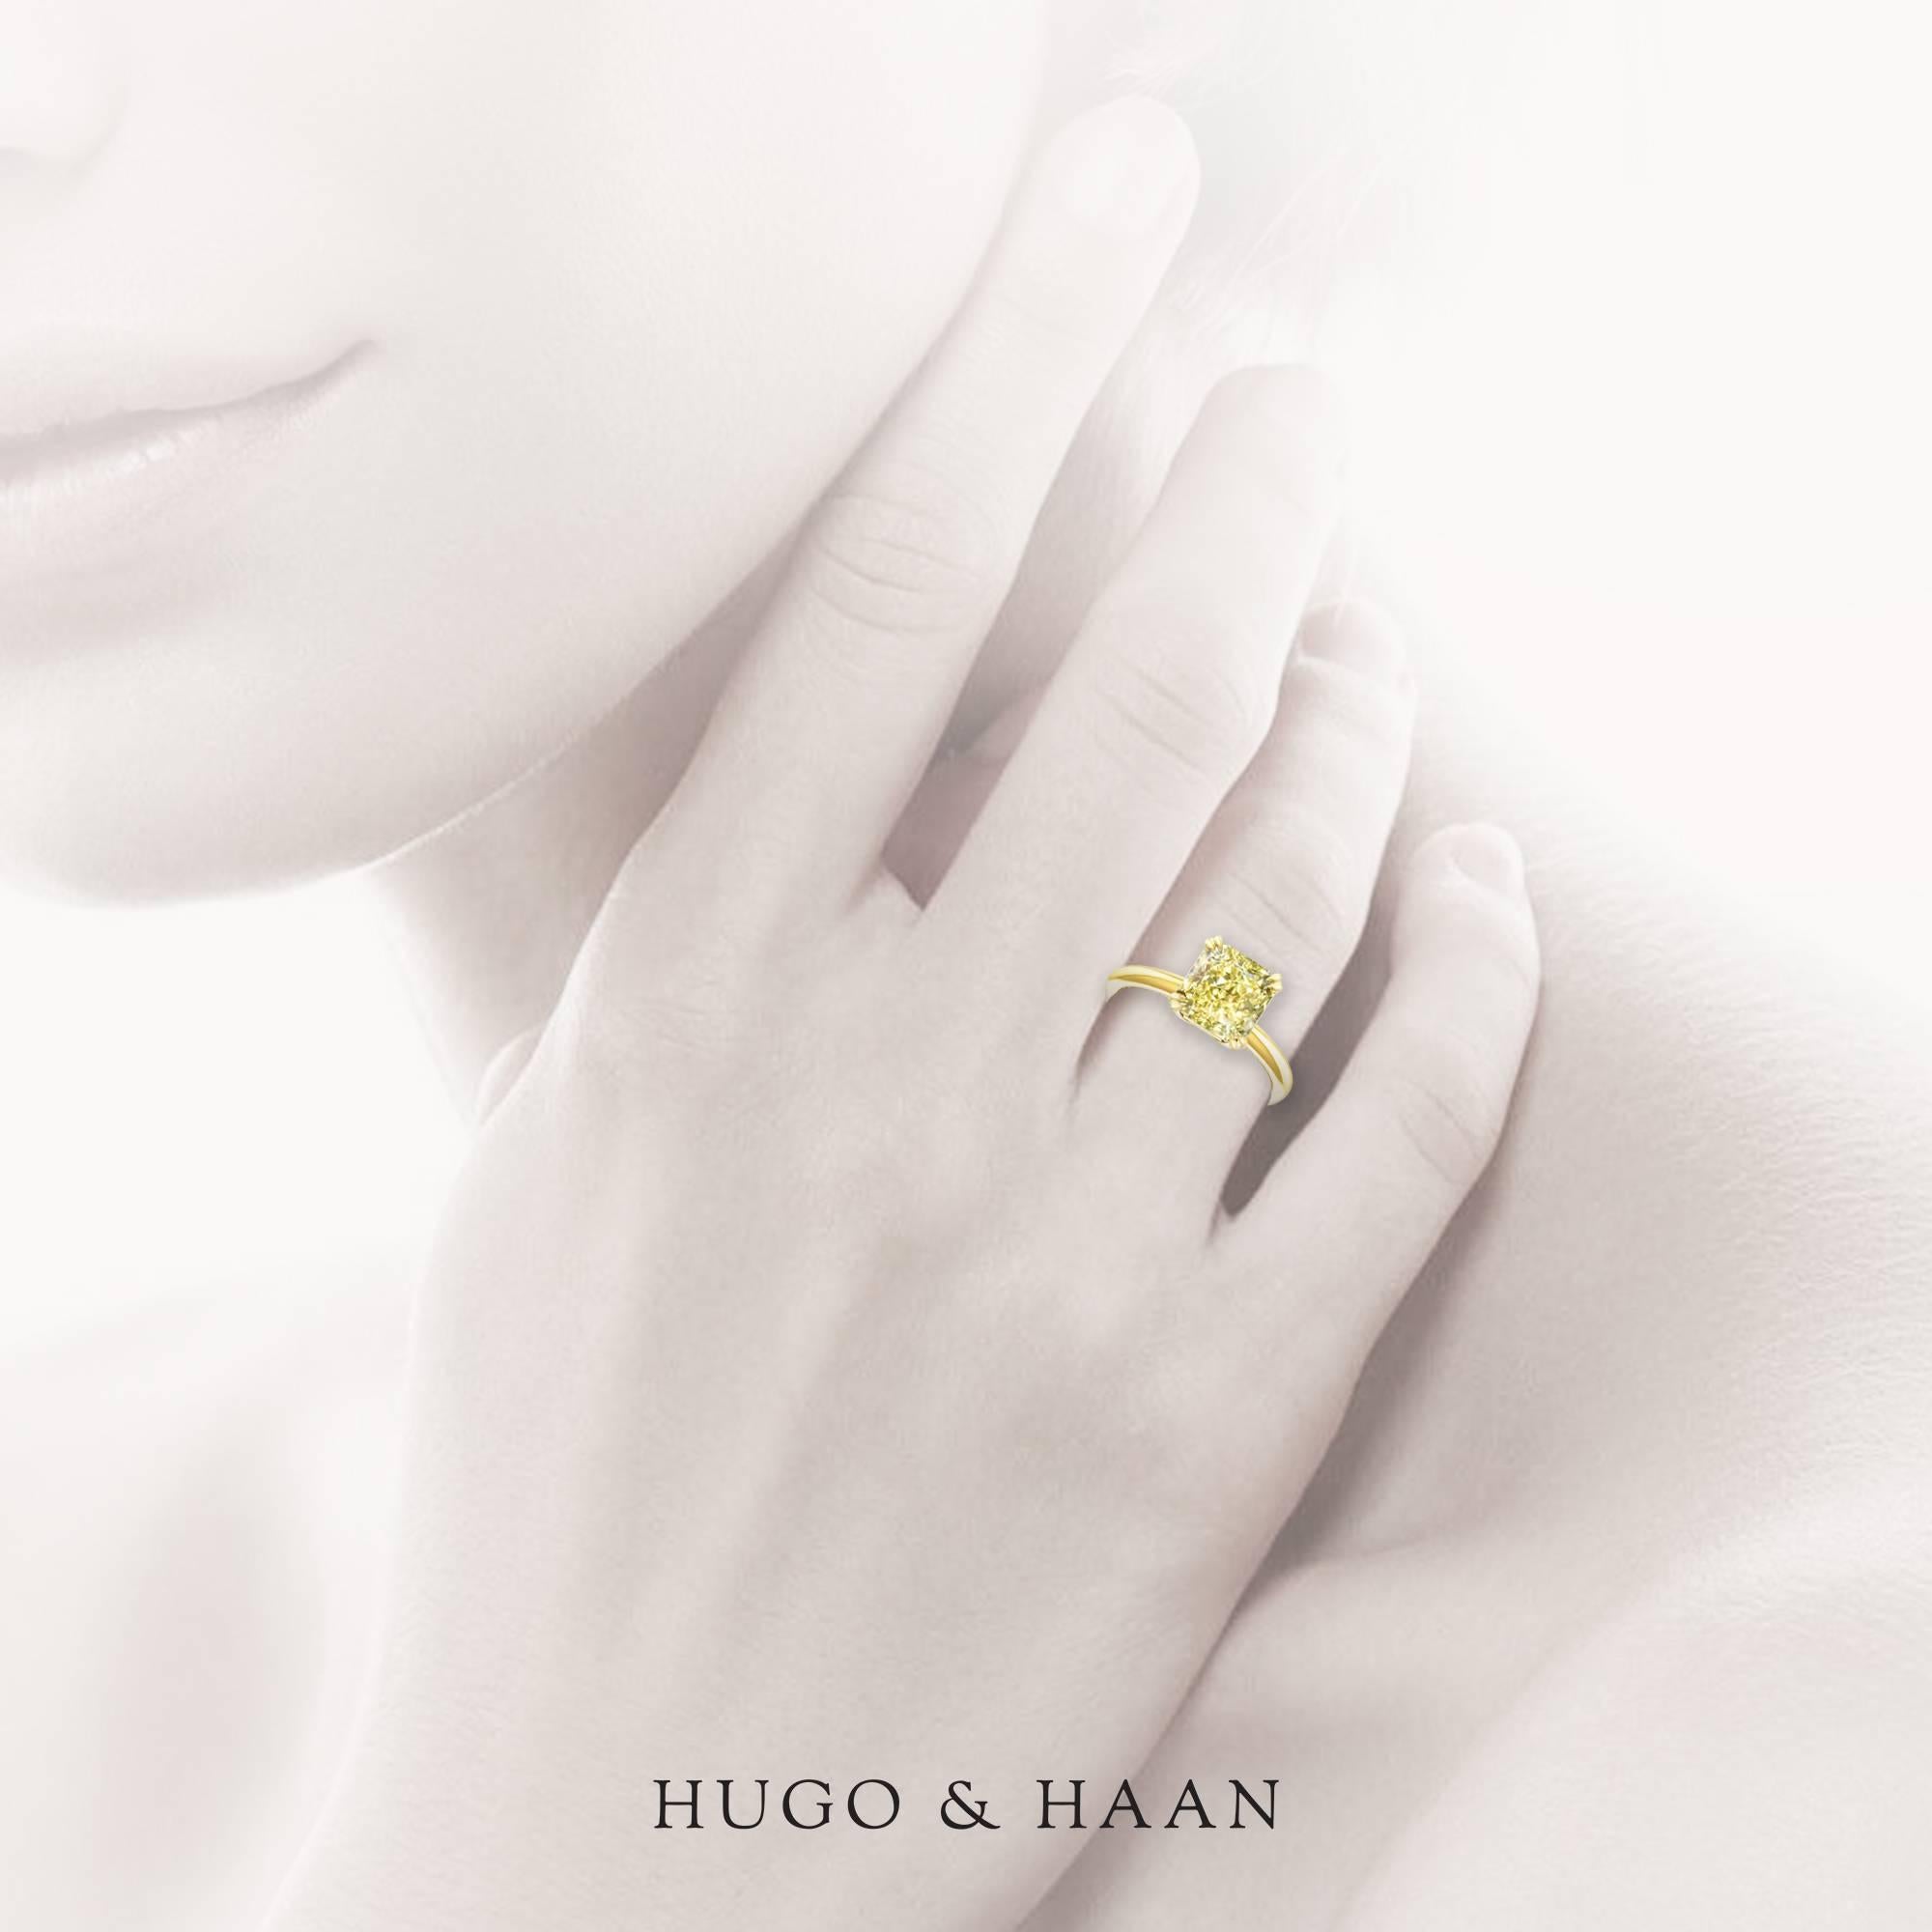 Hugo & Haan Gold GIA Certified Radiant Cut Yellow Diamond Engagement Ring In New Condition For Sale In London, GB